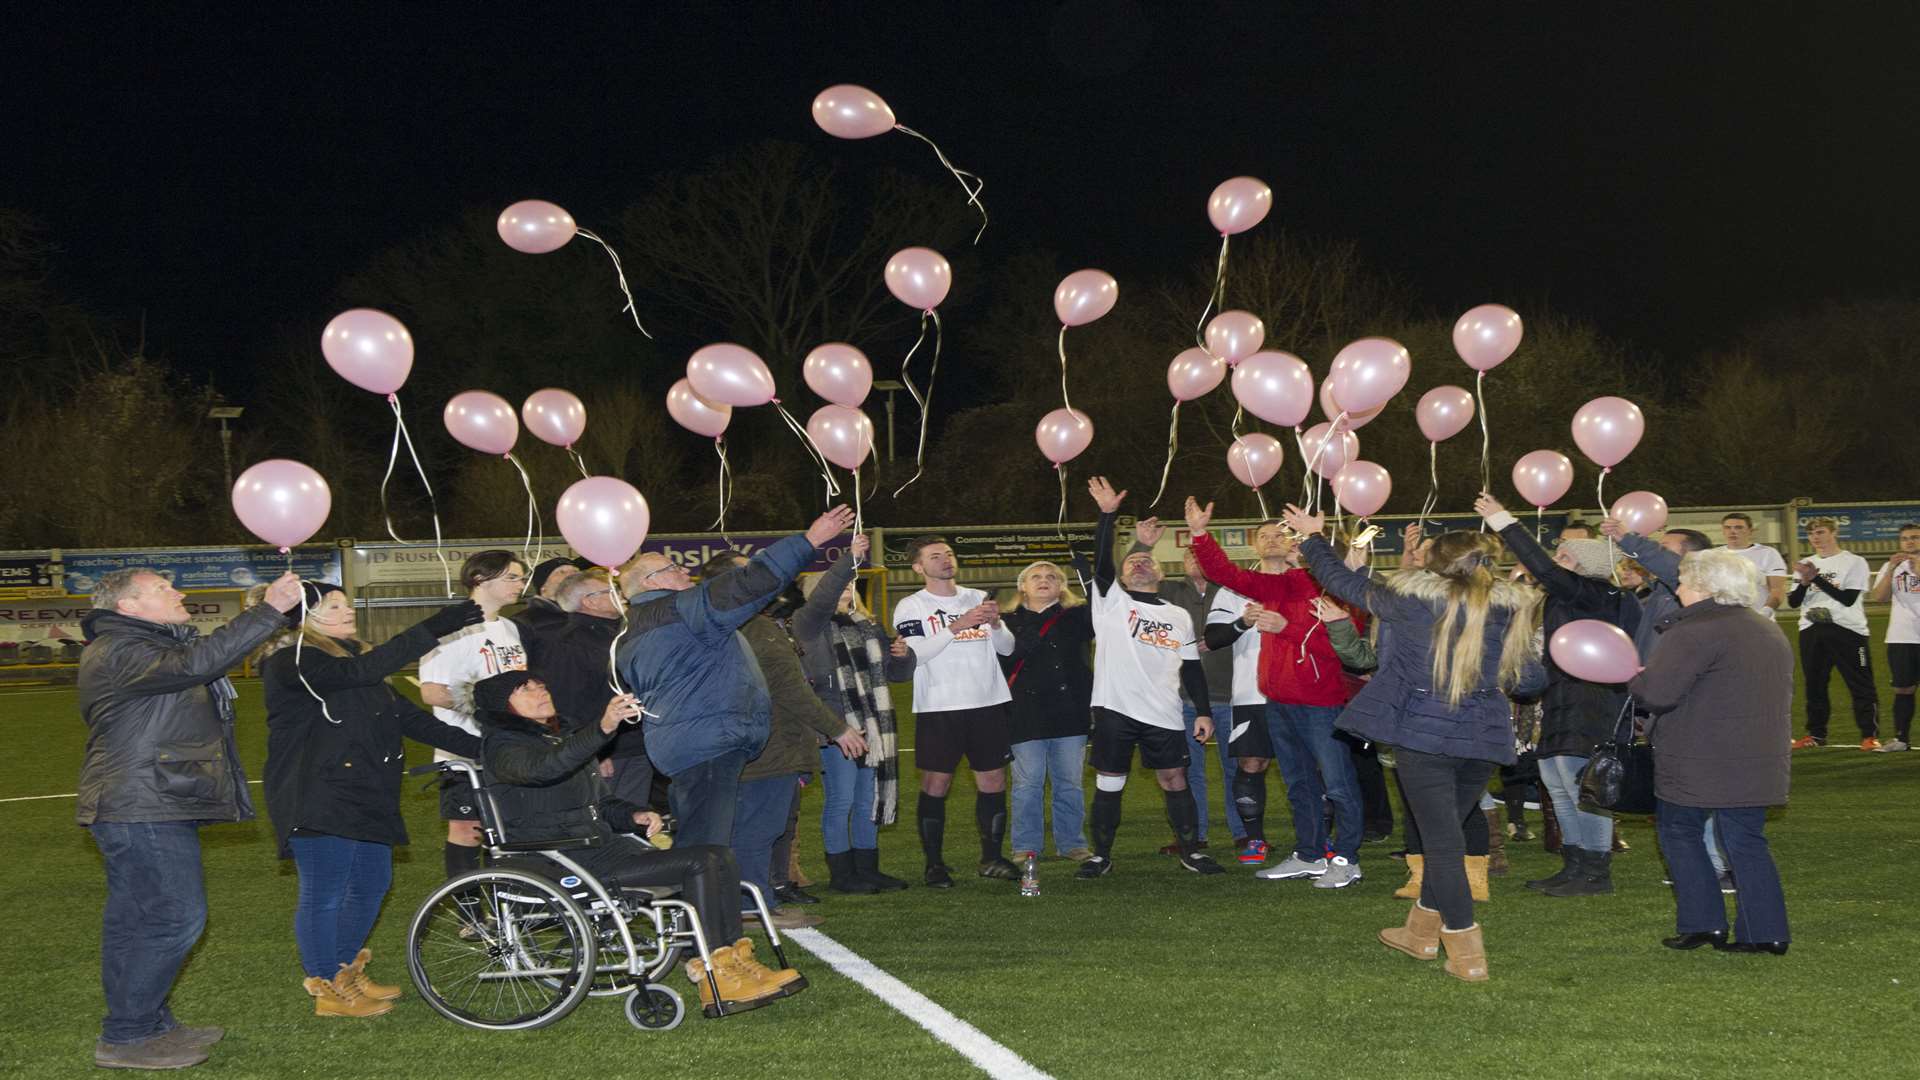 Family and friends released balloons before last year's match